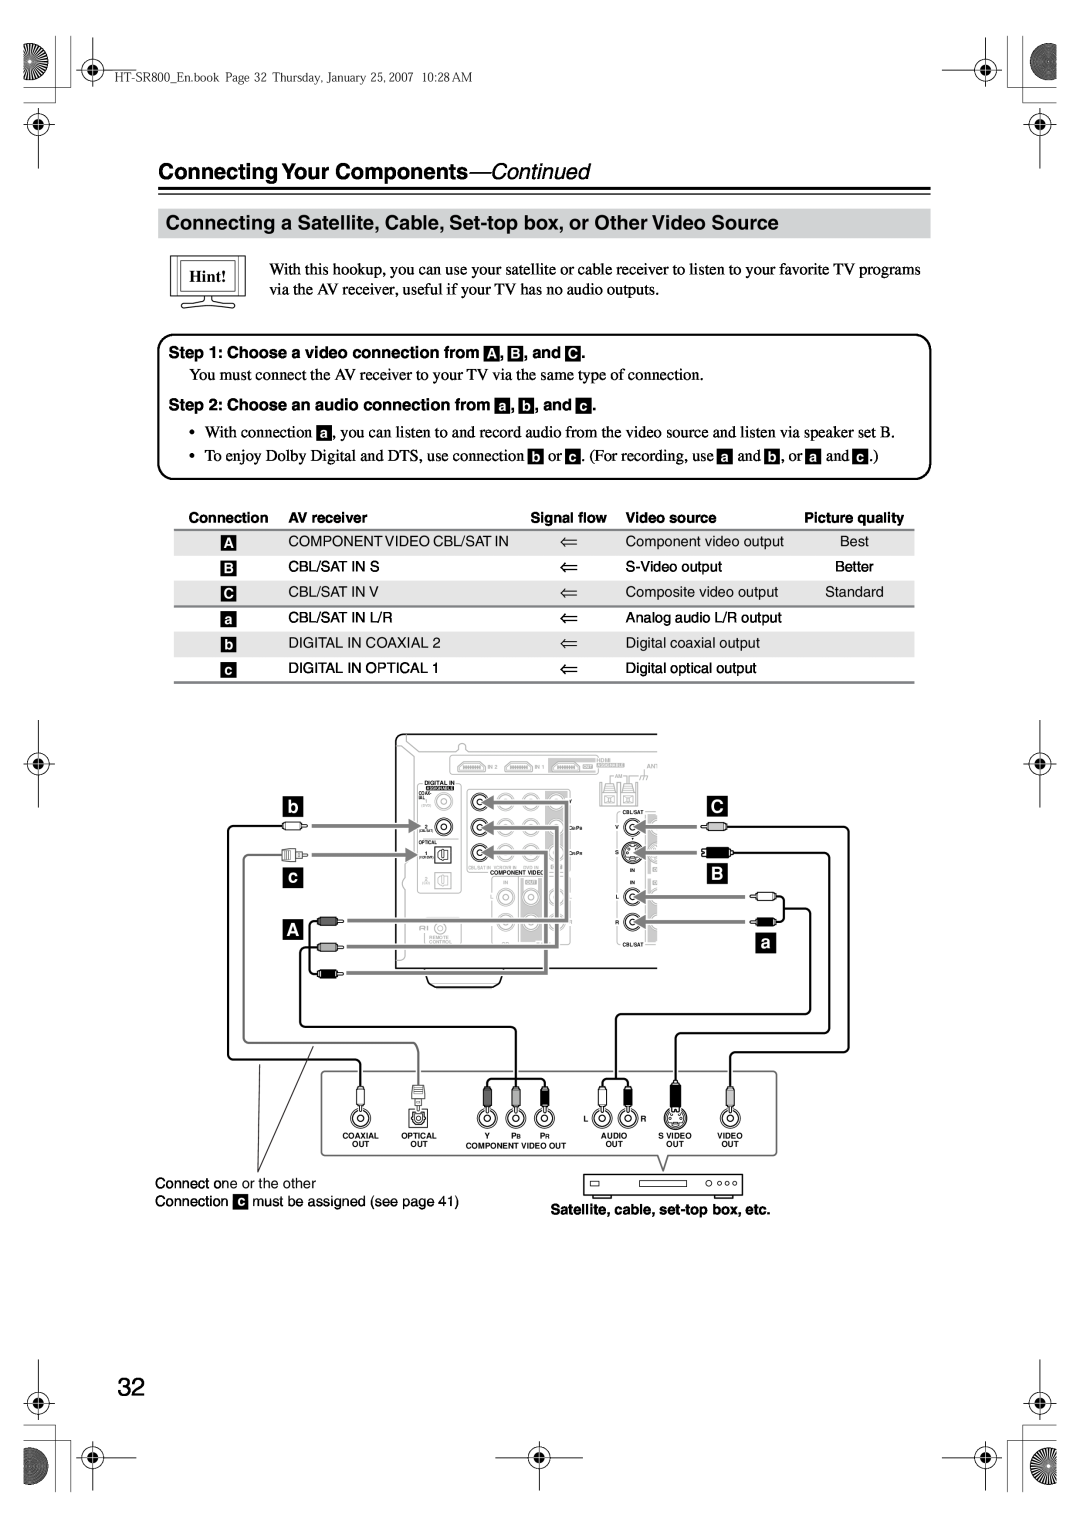 Onkyo HT-SR800 instruction manual b c A, Connecting Your Components-Continued, Hint, AV receiver, Video source 